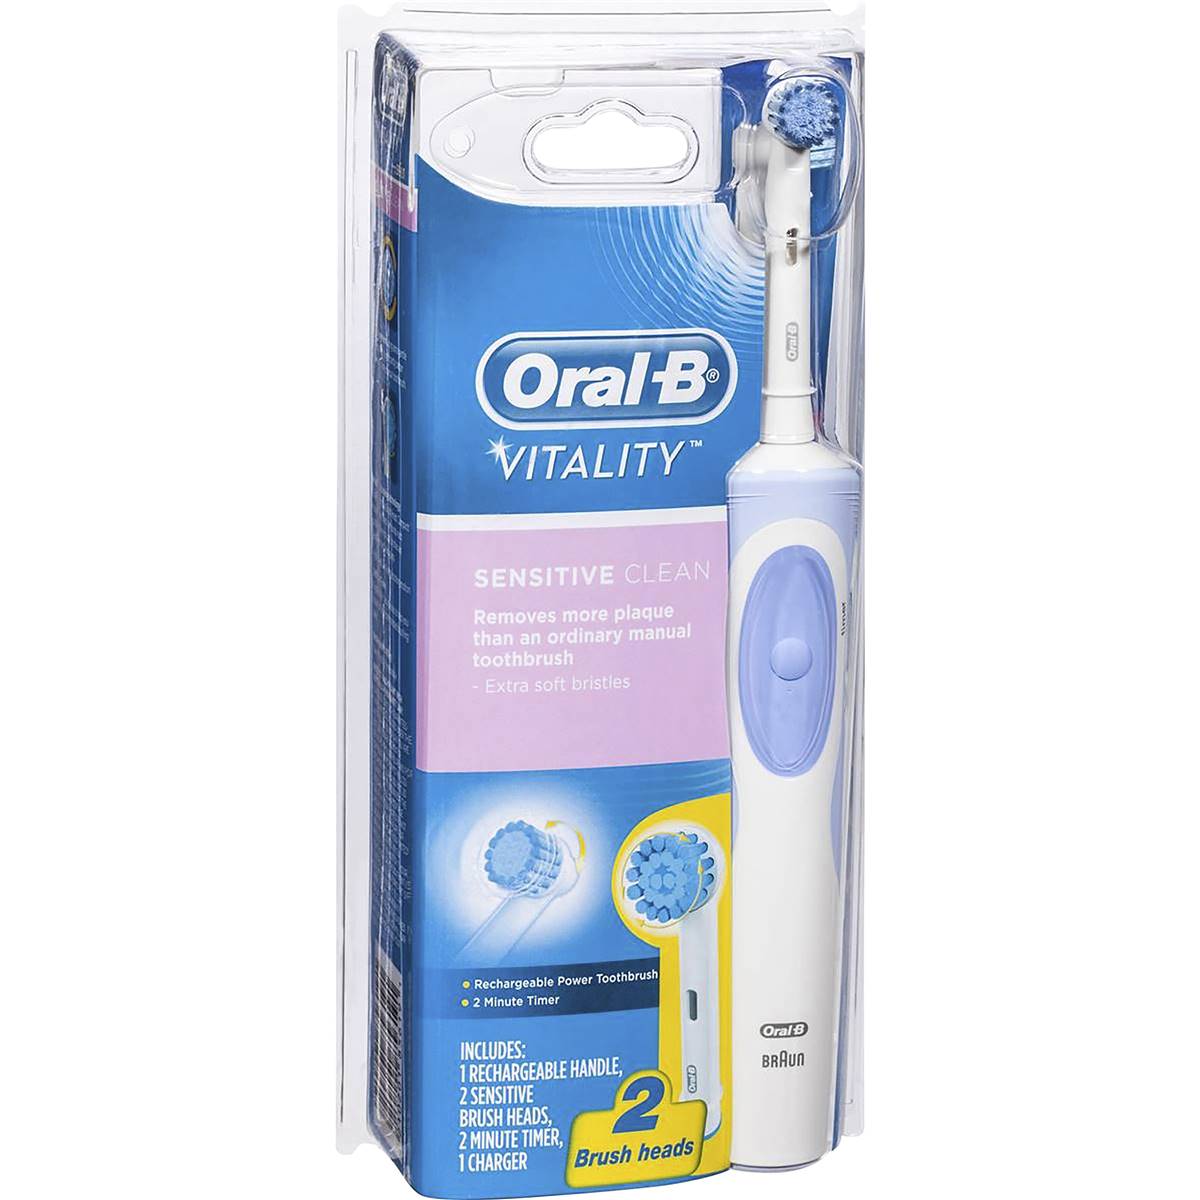 Oral-b Vitality Plus Toothbrush Electric Sensitive Clean